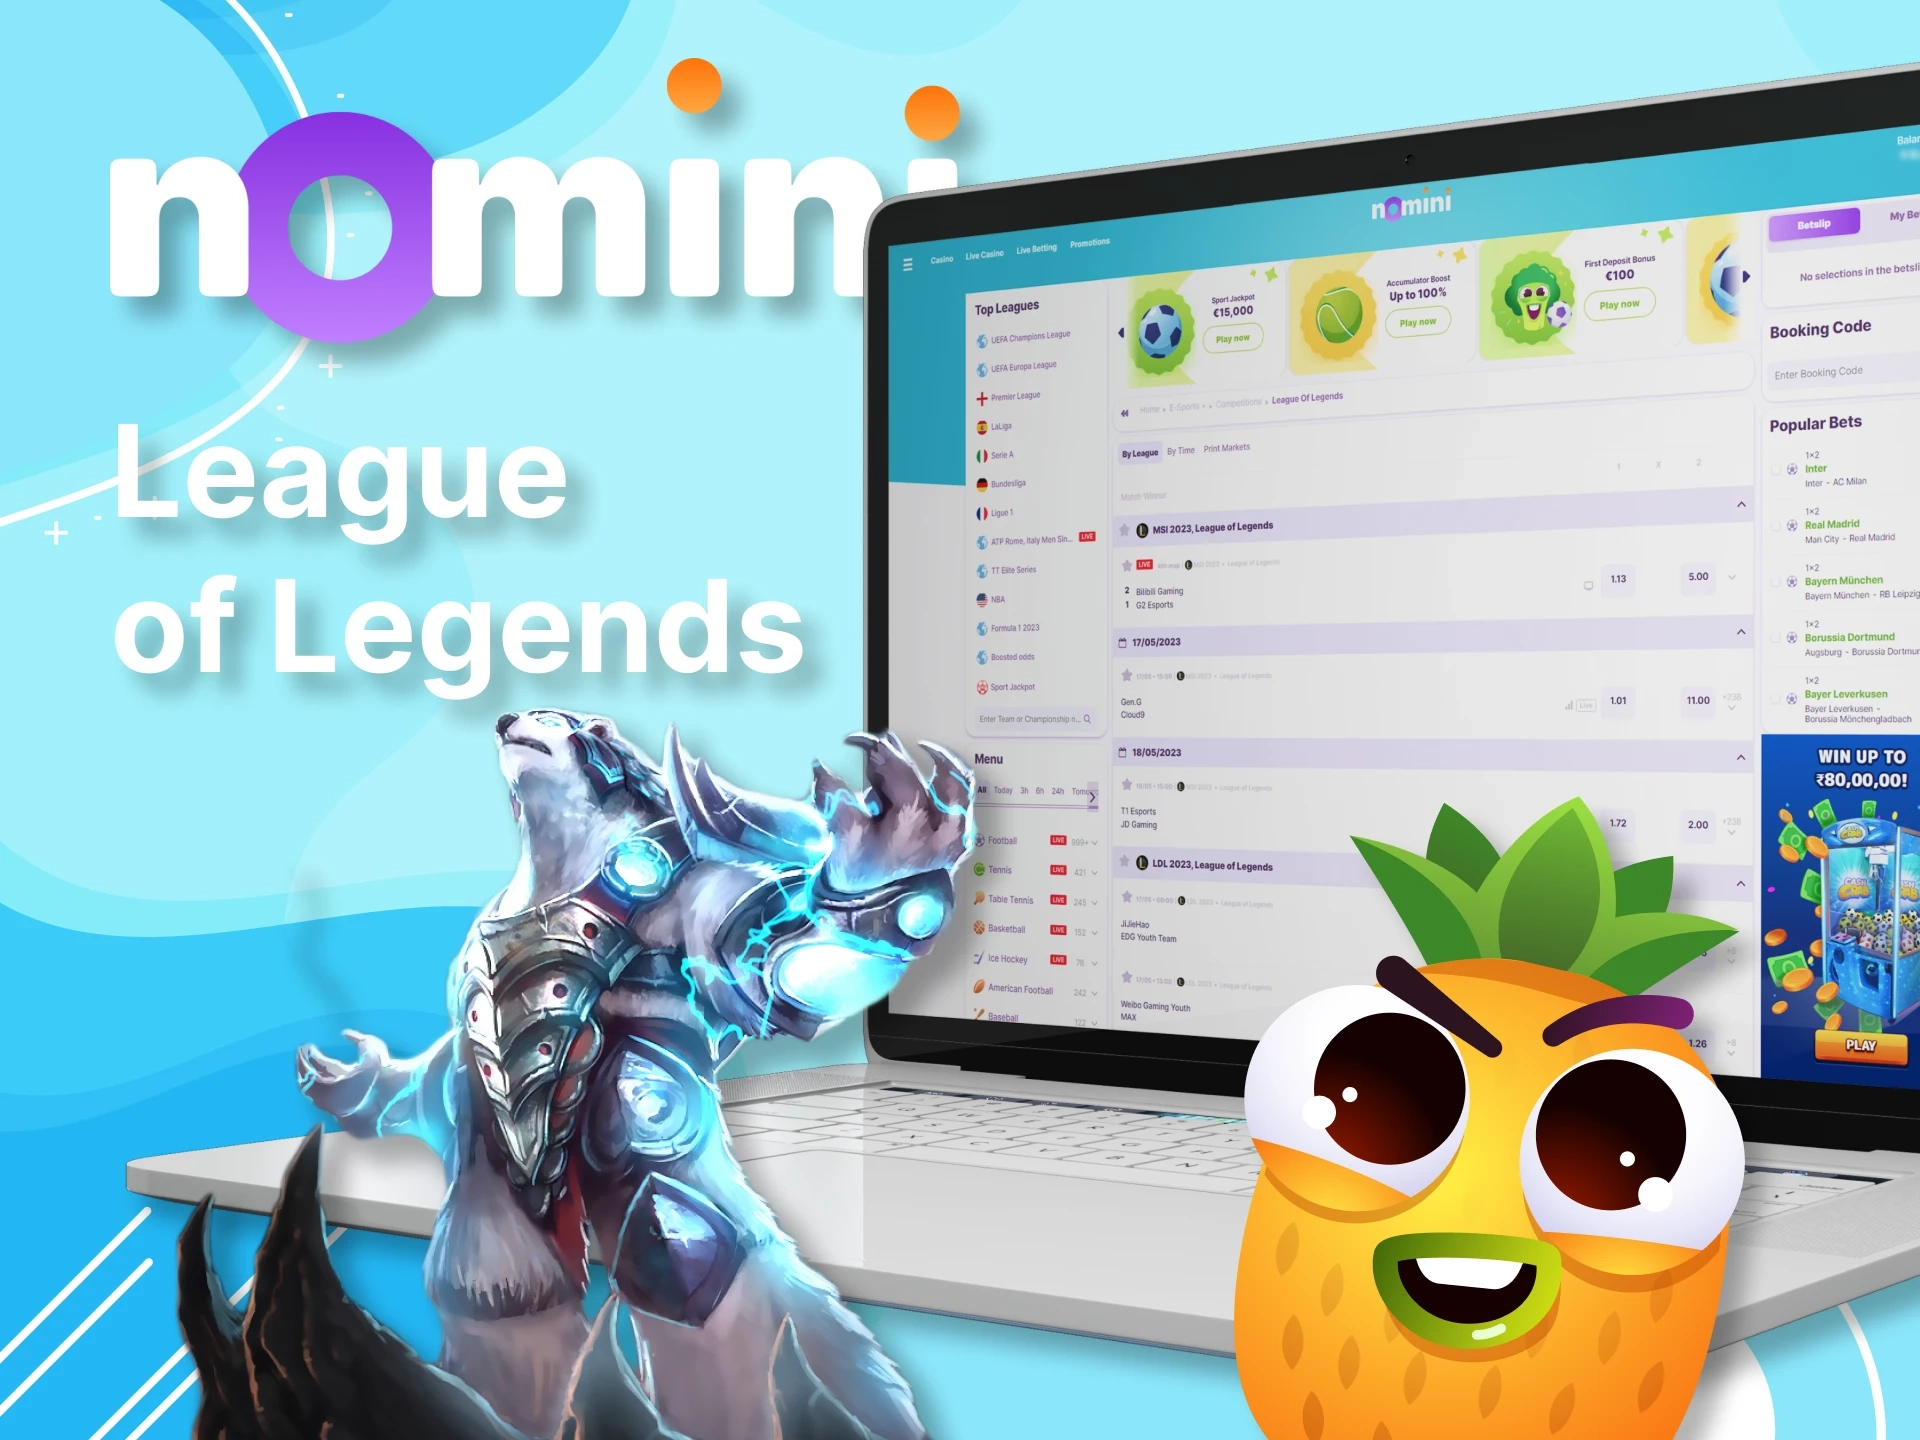 Place your bet on the League of Legends tournament at Nomini.